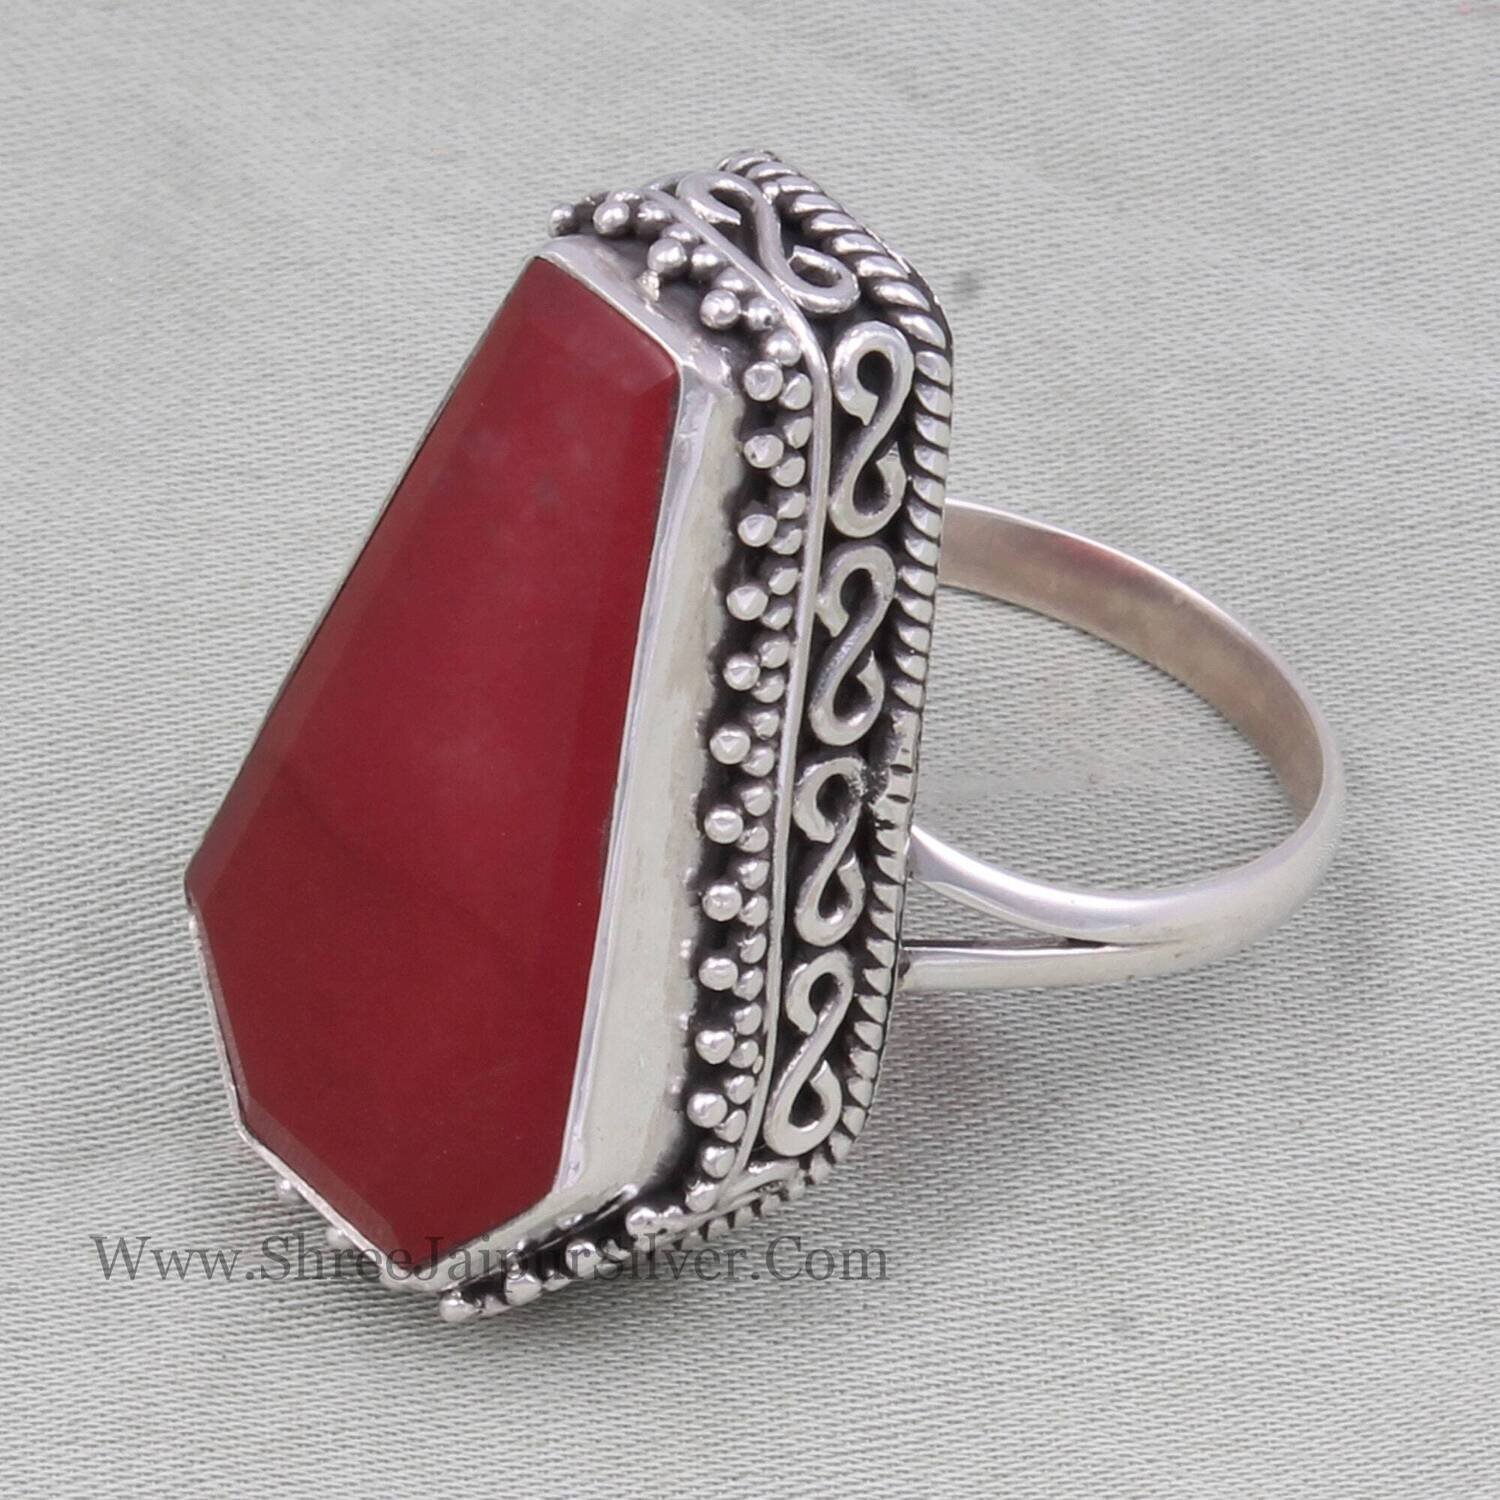 Red Jade Coffin Vintage Work Solid 925 Sterling Silver Ring For Women, Handmade Coffin Cut Stone Ring For Wedding Anniversary Gifts For Her